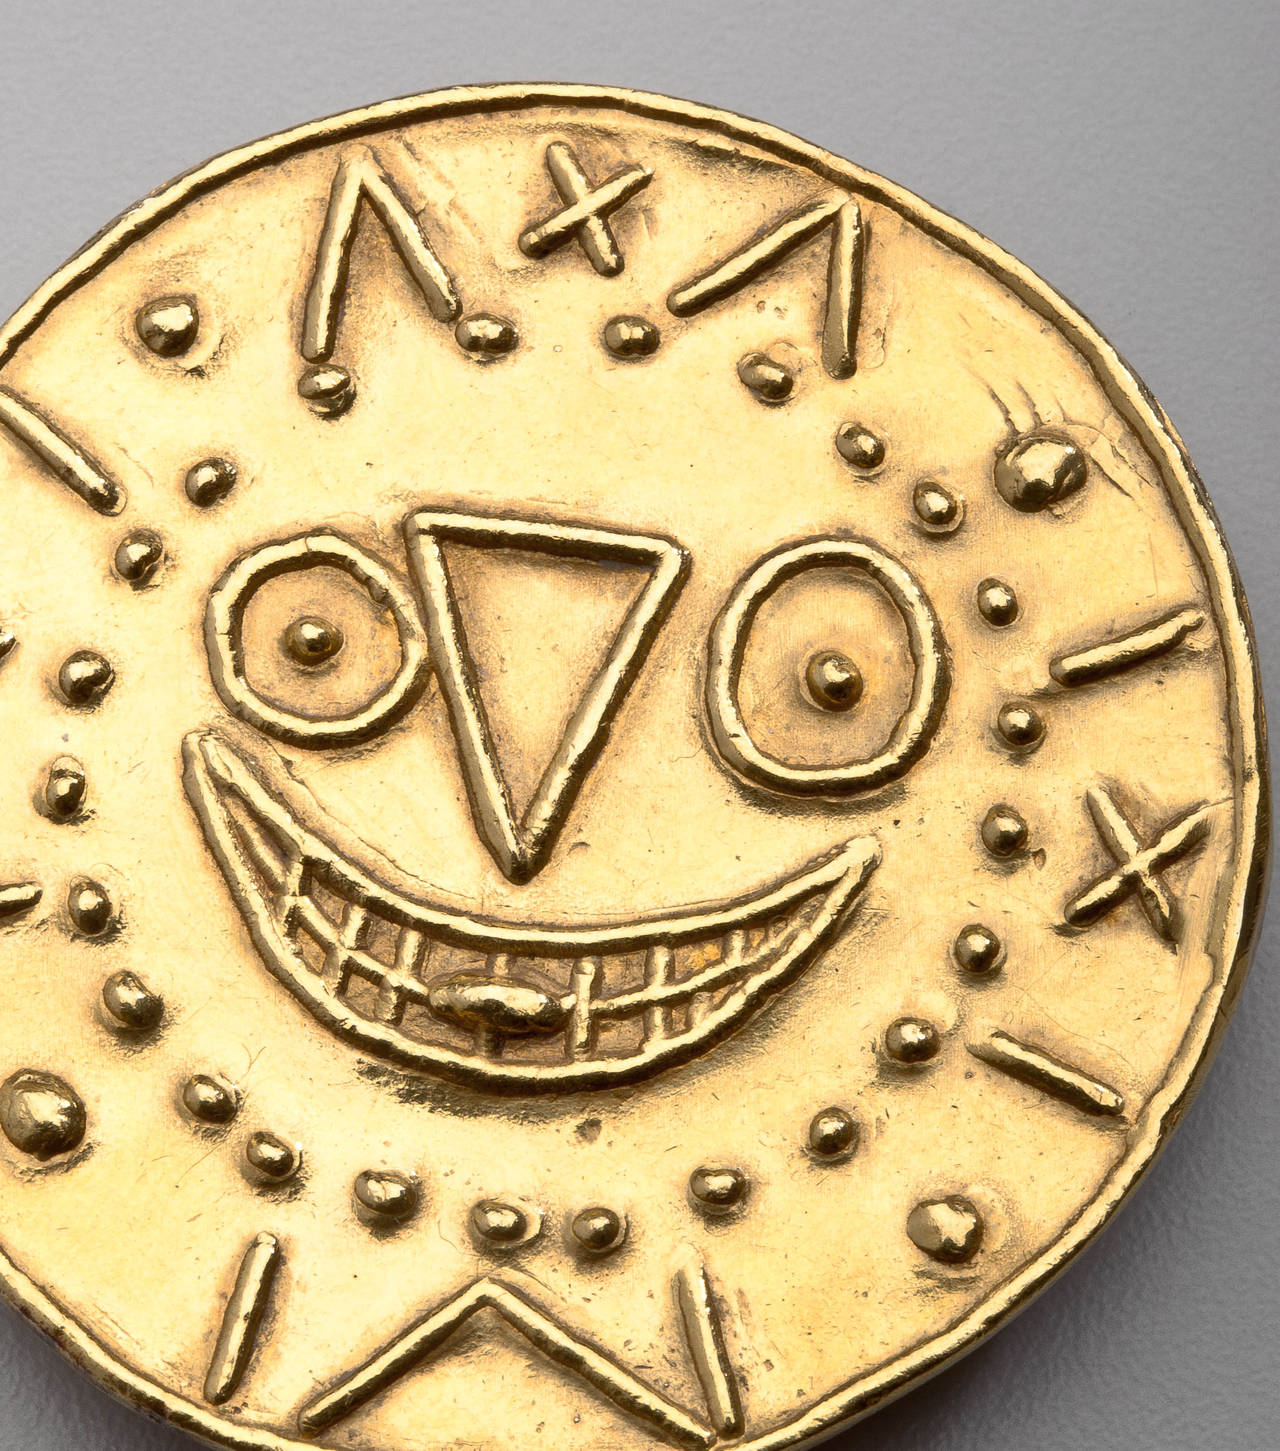 An 18 karat gold pendant/ brooch by Pablo Picasso in its original box.  The  pendant/brooch is designed as a clock with a face in the center and the tongue sticking out.  Picasso titled the medallion appropriately, 